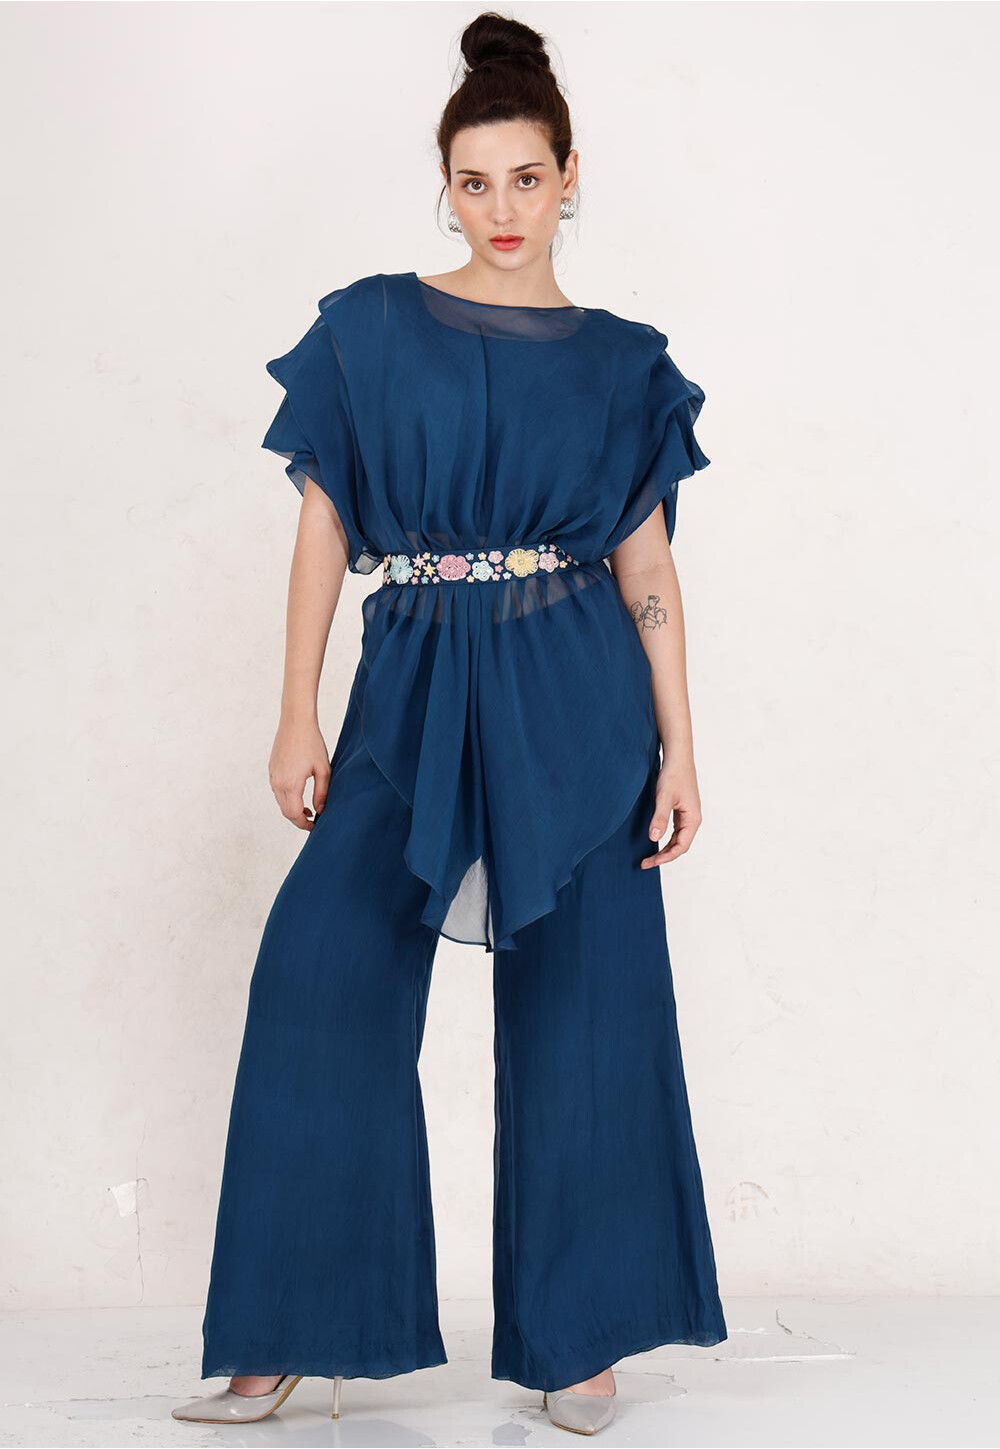 Plain Organza Co-Ord Set with Embroidered Belt in Teal Blue : TFQ72